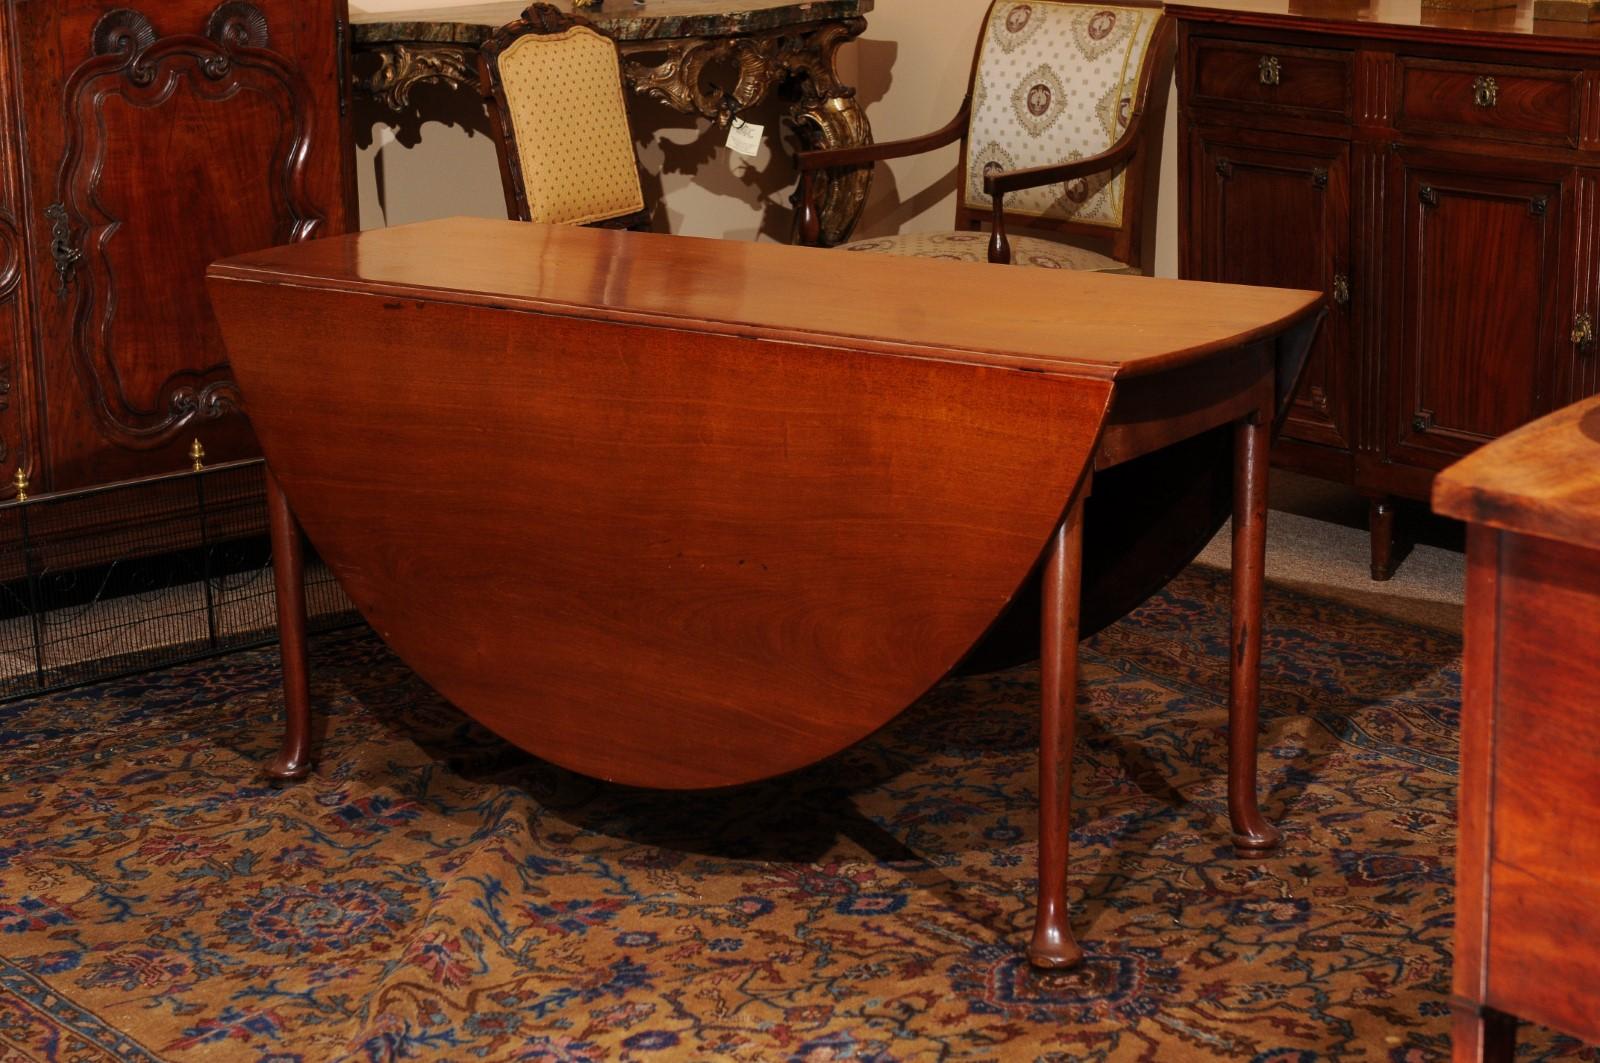  Mid-18th C English George II Mahogany Drop Leaf Oval Dining Table with Pad Feet For Sale 7